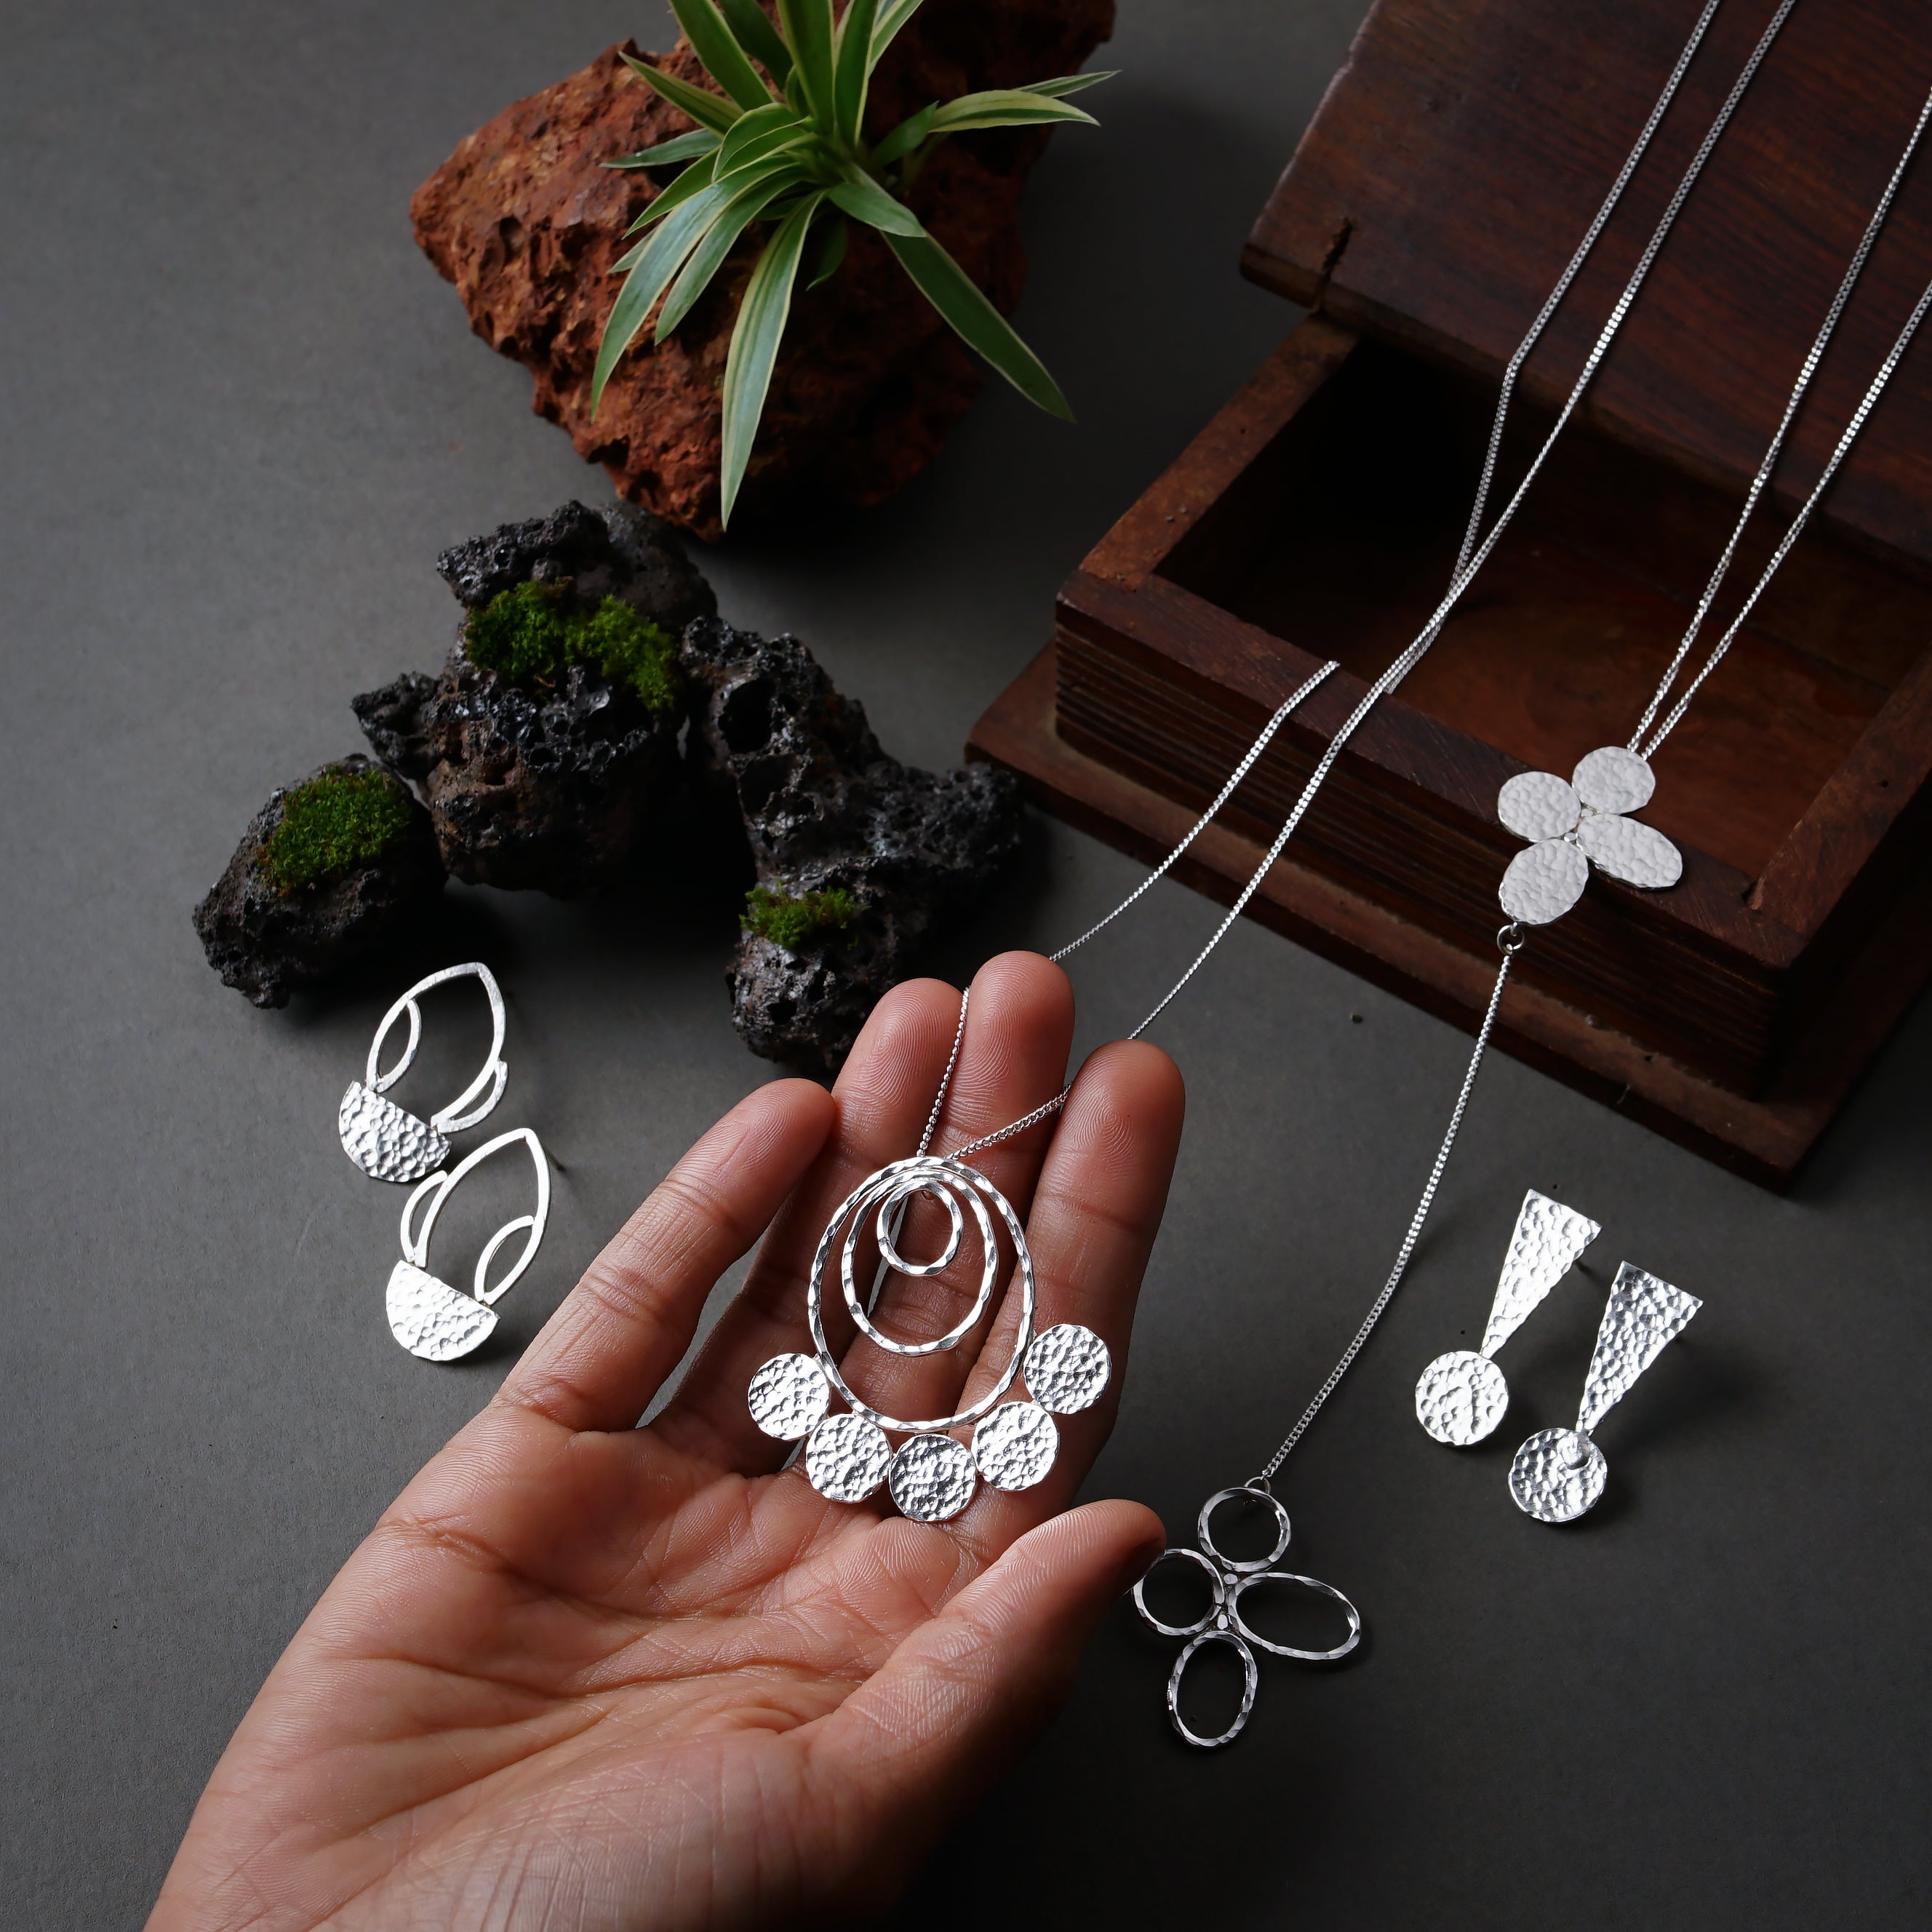 Handmade Jewellery vs Casting Jewellery - What’s the Difference & Which is Better?